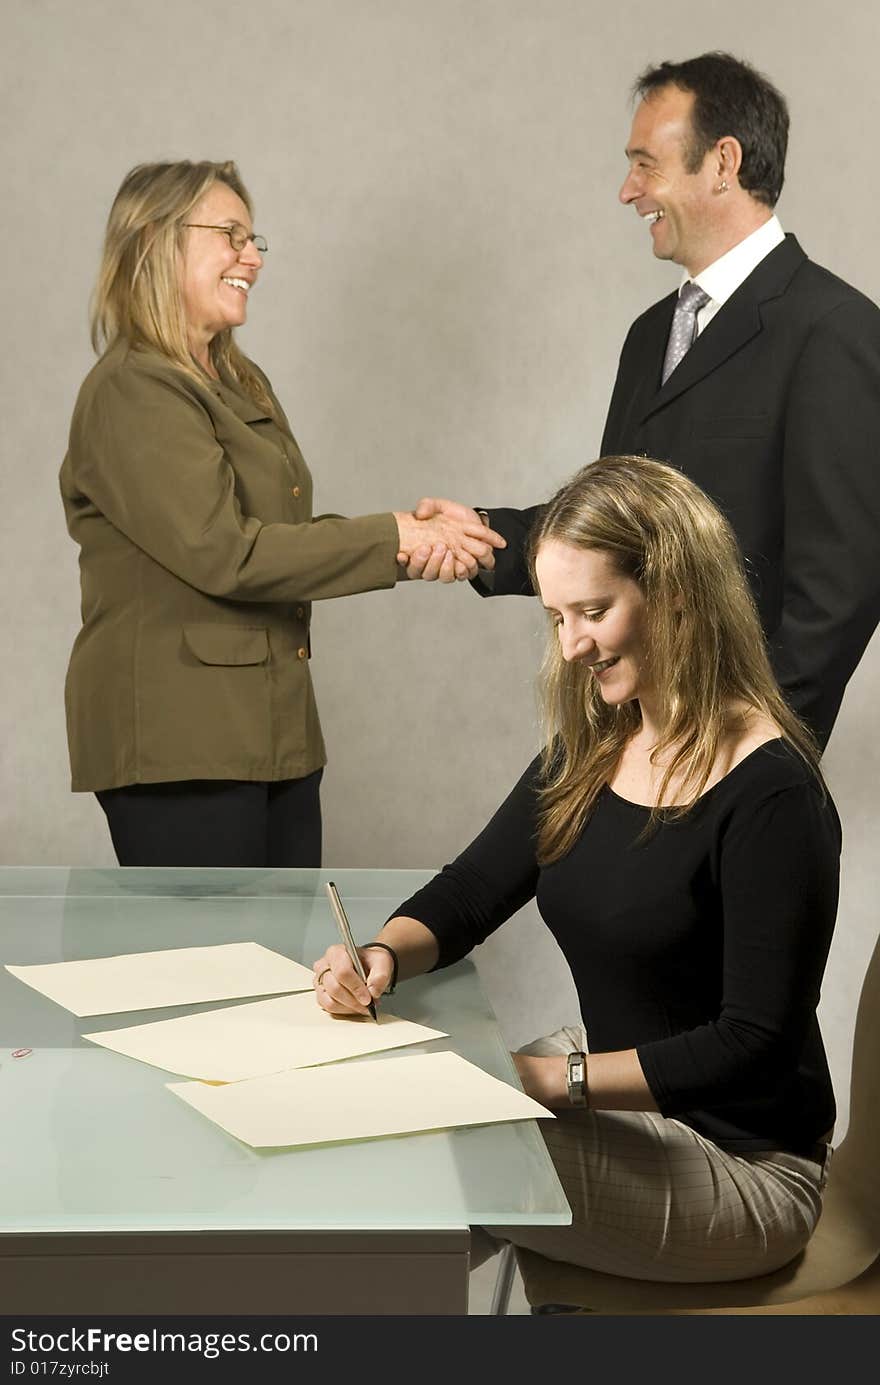 Three people are in a room together. The youngest member is smiling and studying paper on the table in front of her. The other two are shaking hands and smiling at each other. Vertically framed shot. Three people are in a room together. The youngest member is smiling and studying paper on the table in front of her. The other two are shaking hands and smiling at each other. Vertically framed shot.